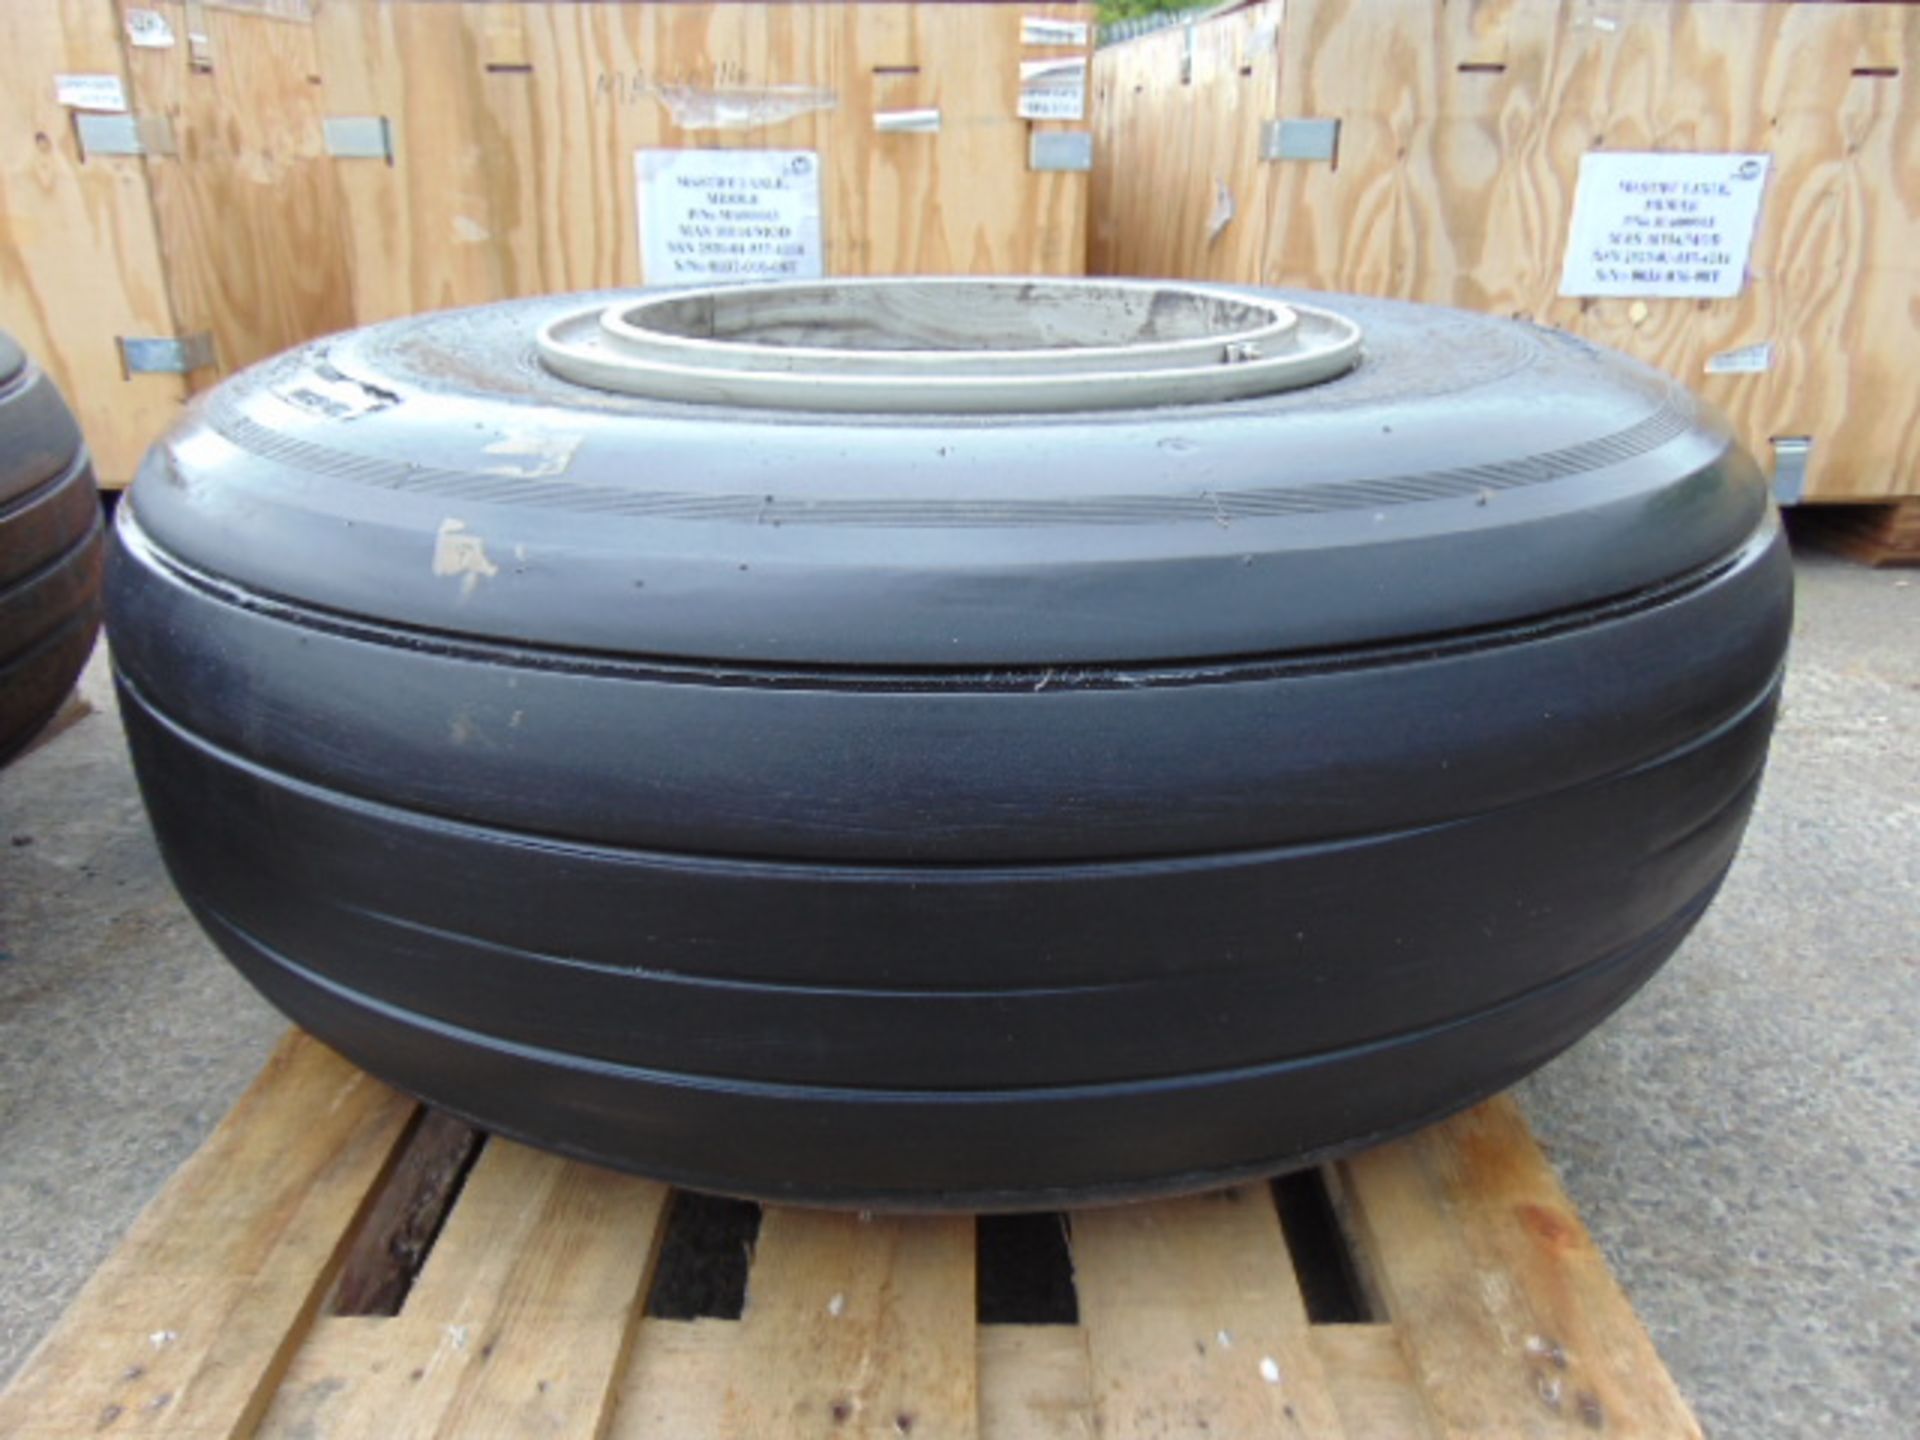 VC10 Aircraft Tyre and Rim - Image 4 of 7